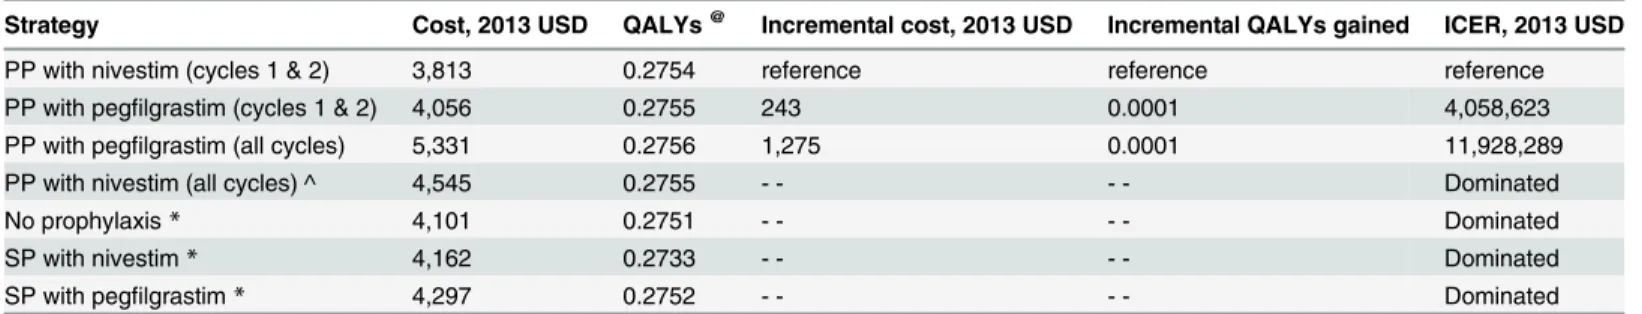 Table 4. Results of the costs and effectiveness of the prophylaxis strategies (cost per QALY gained).